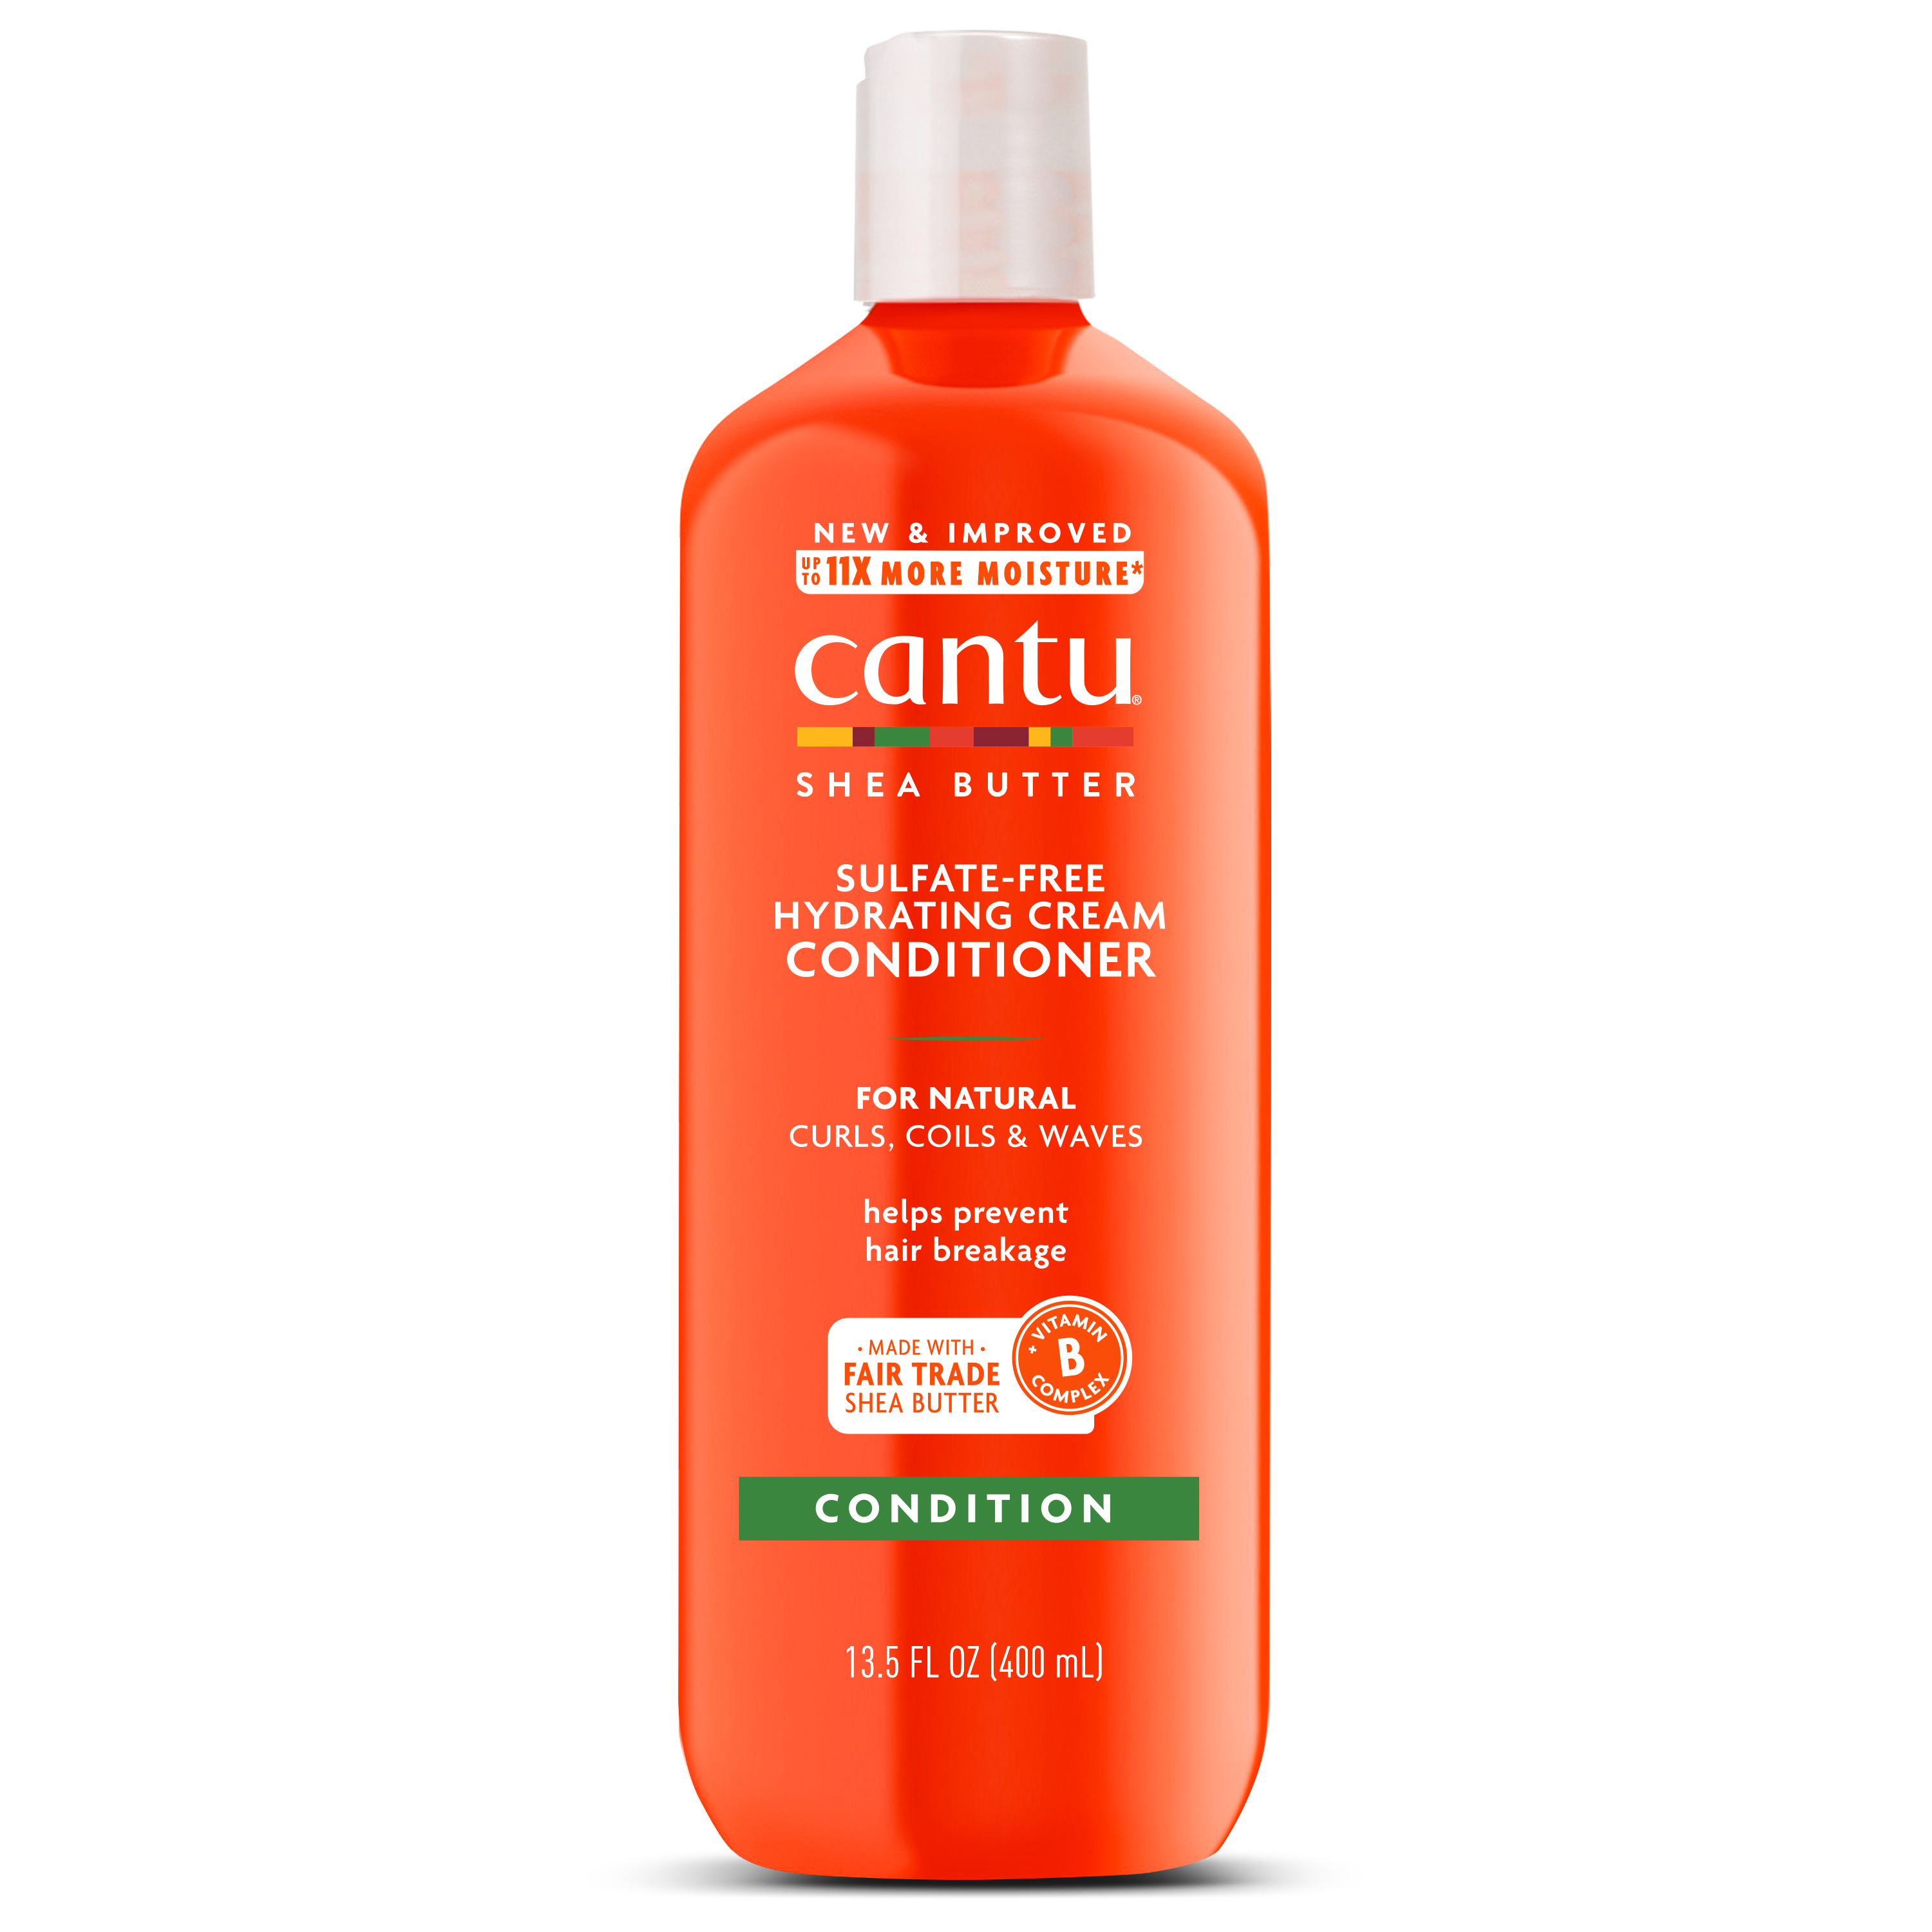 Cantu Hydrating Cream Conditioner with Shea Butter for Natural Hair, 13.5 fl oz - image 1 of 8